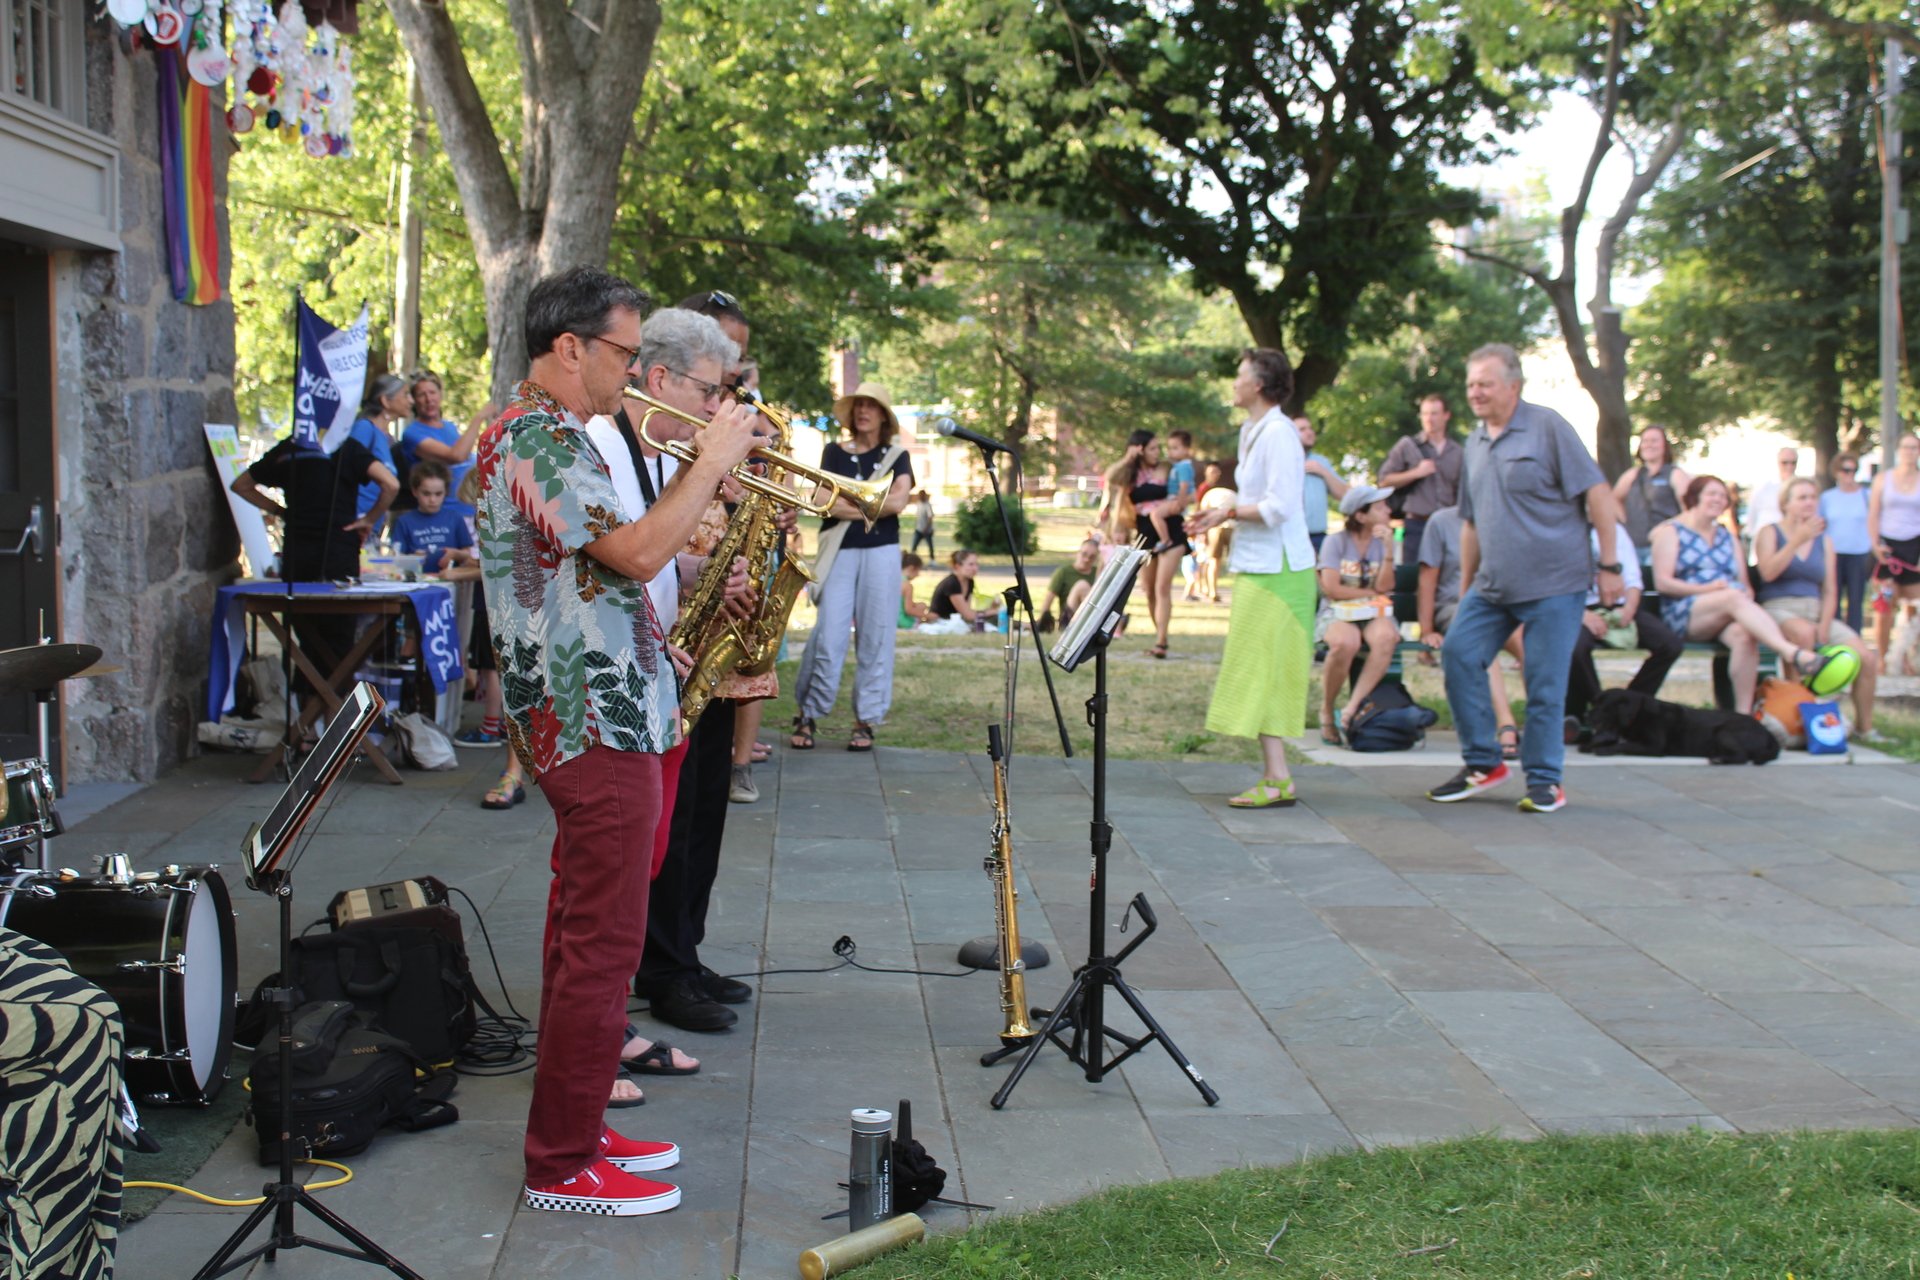 A man in a floral shirt and maroon pants plats the trumpet on a stone walkway. A crowd of people watch and two people are dancing.